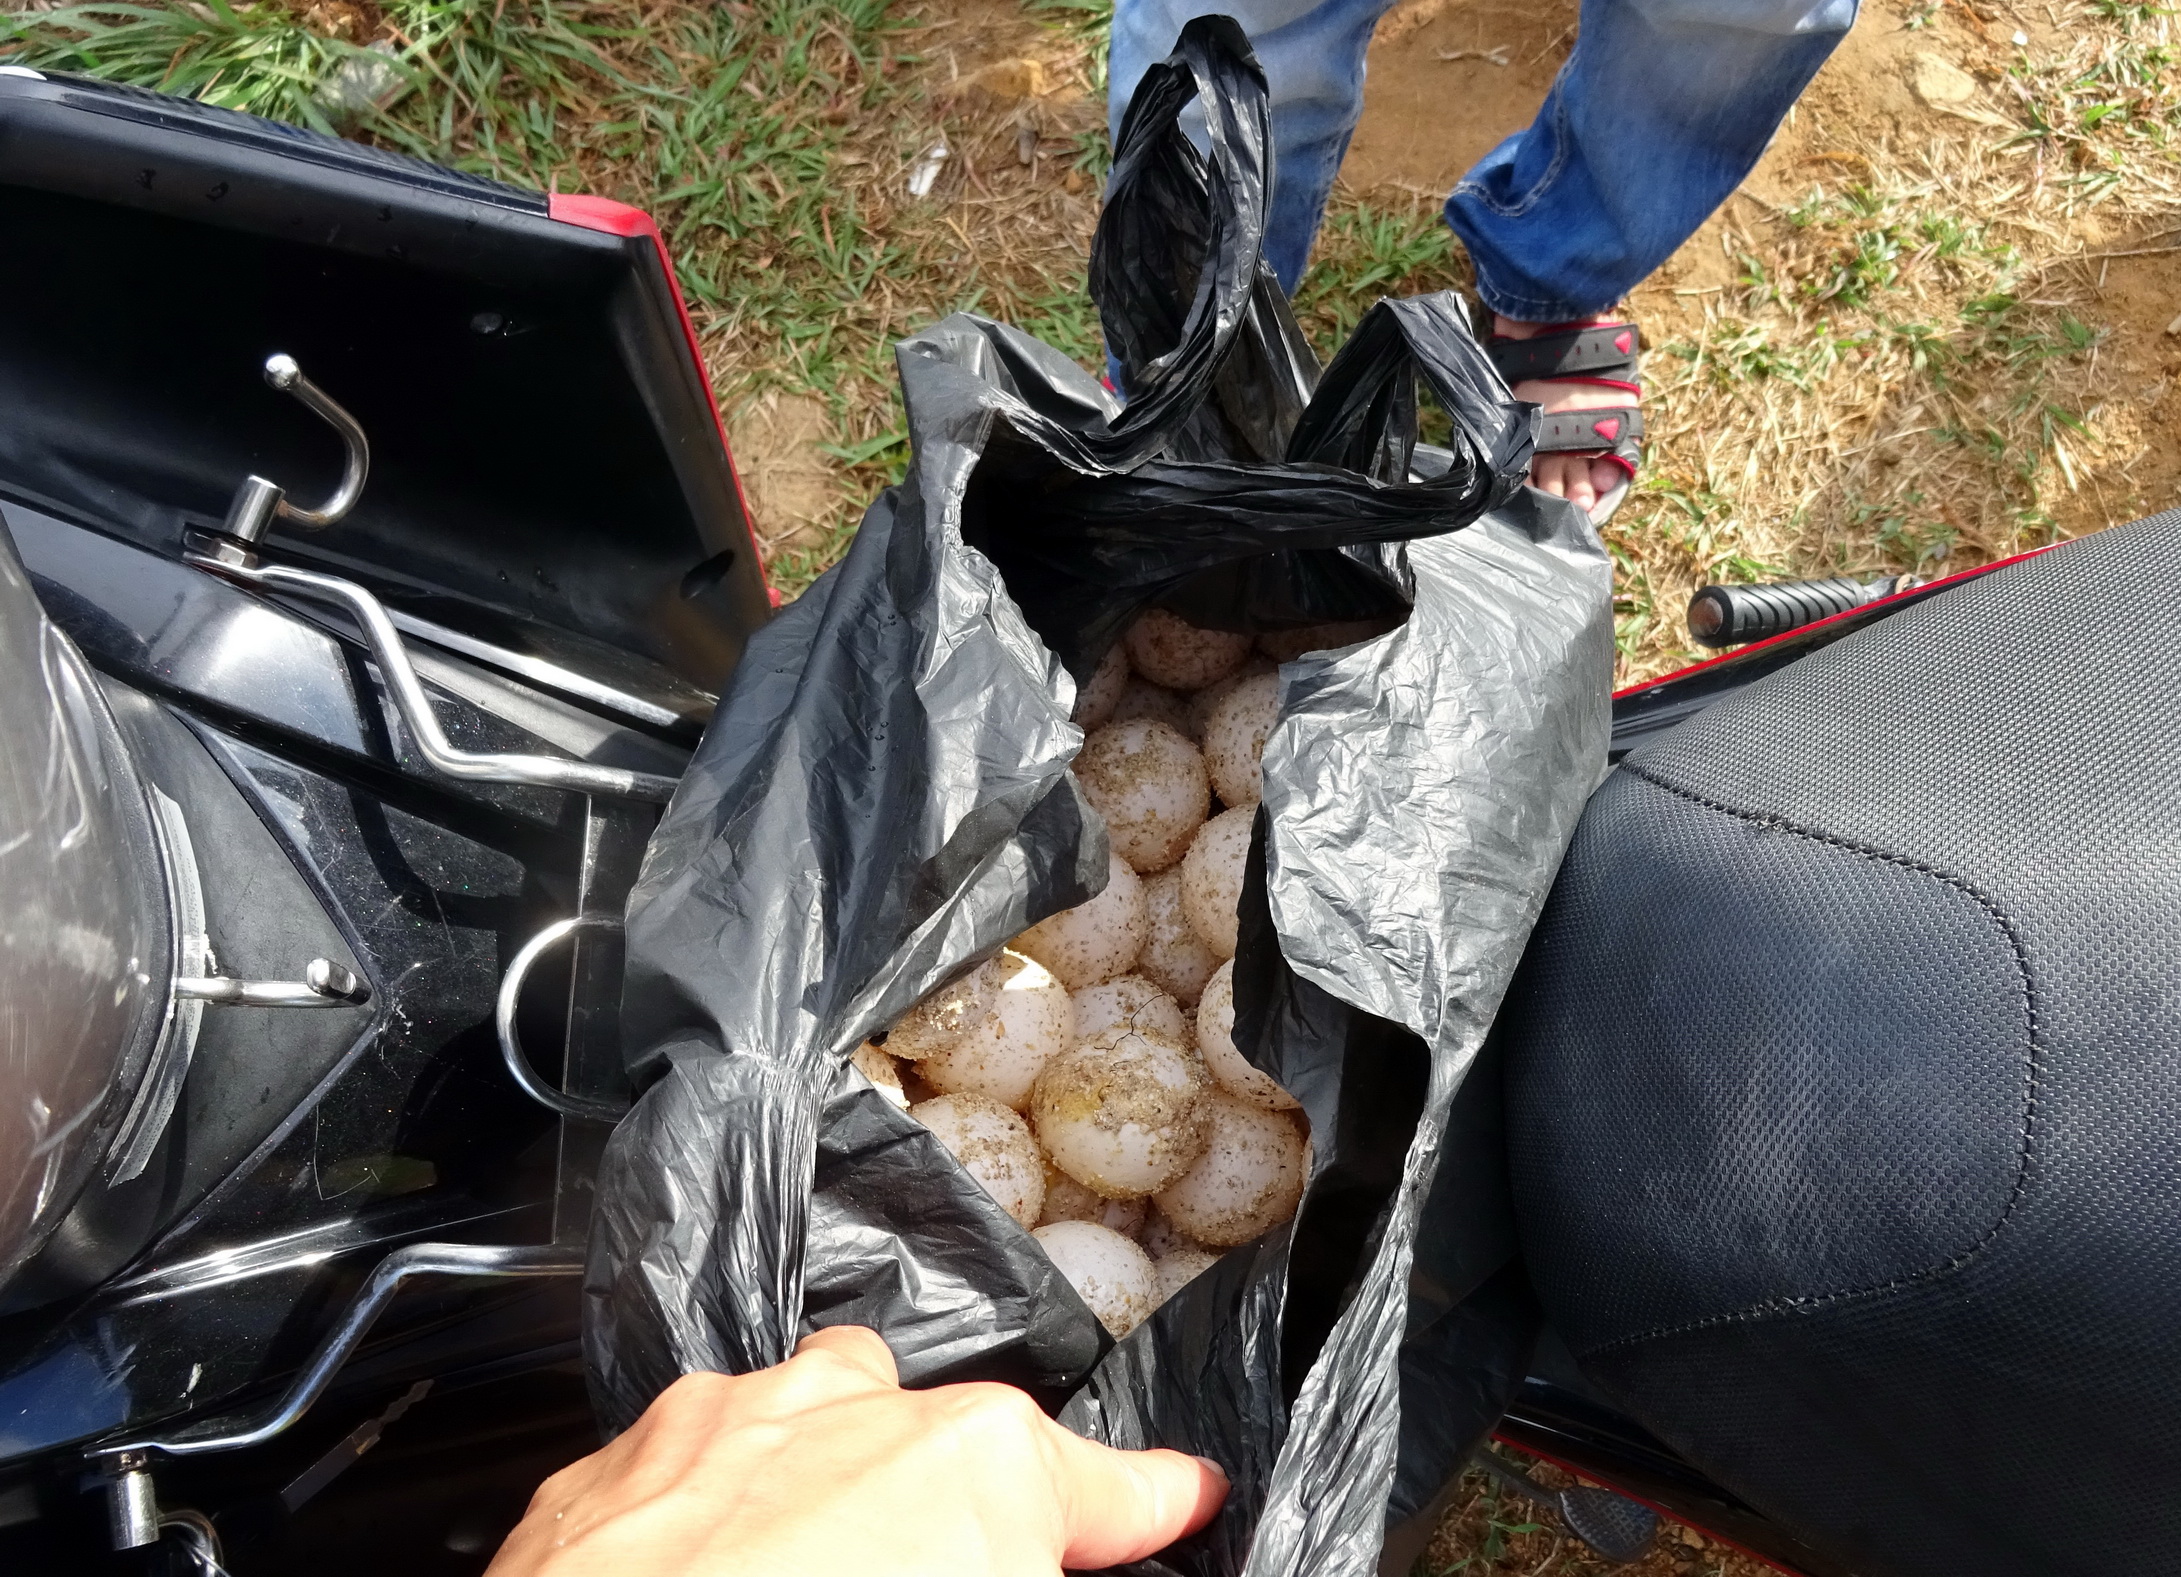 Vietnam prosecutor says turtle egg is not from a turtle